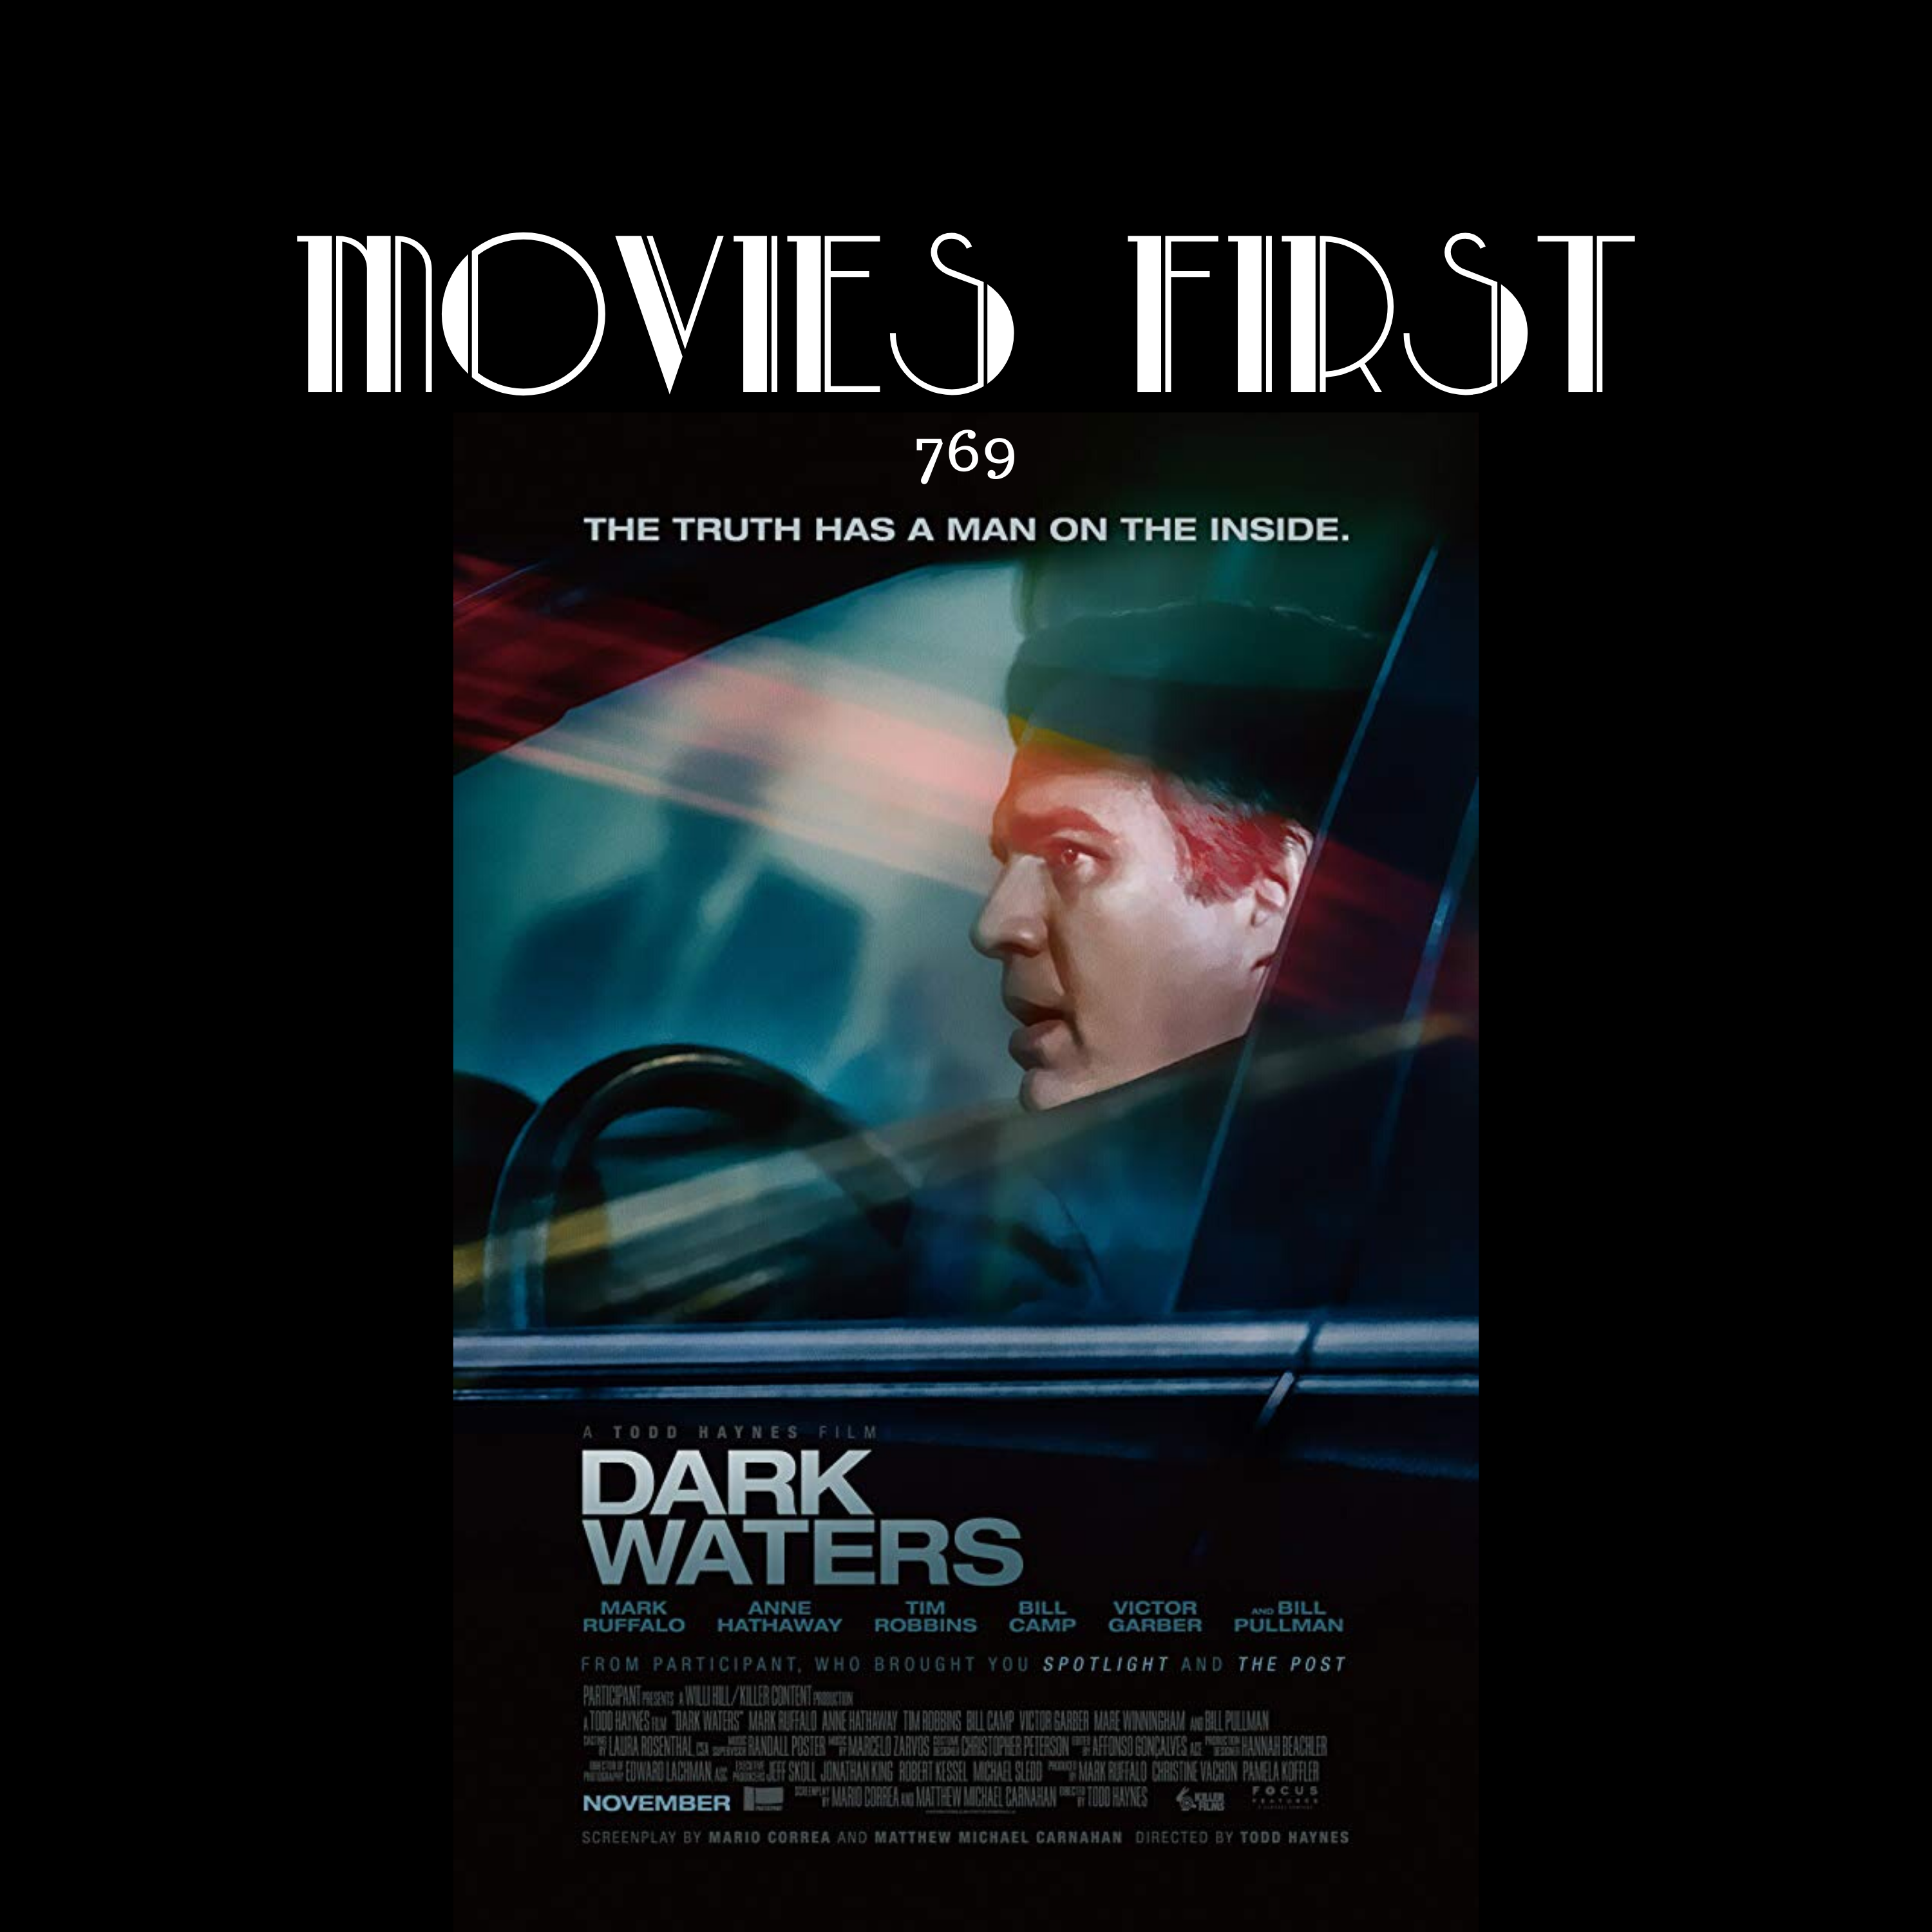 769: Dark Waters (Biography, Drama, History) (the @MoviesFirst review)